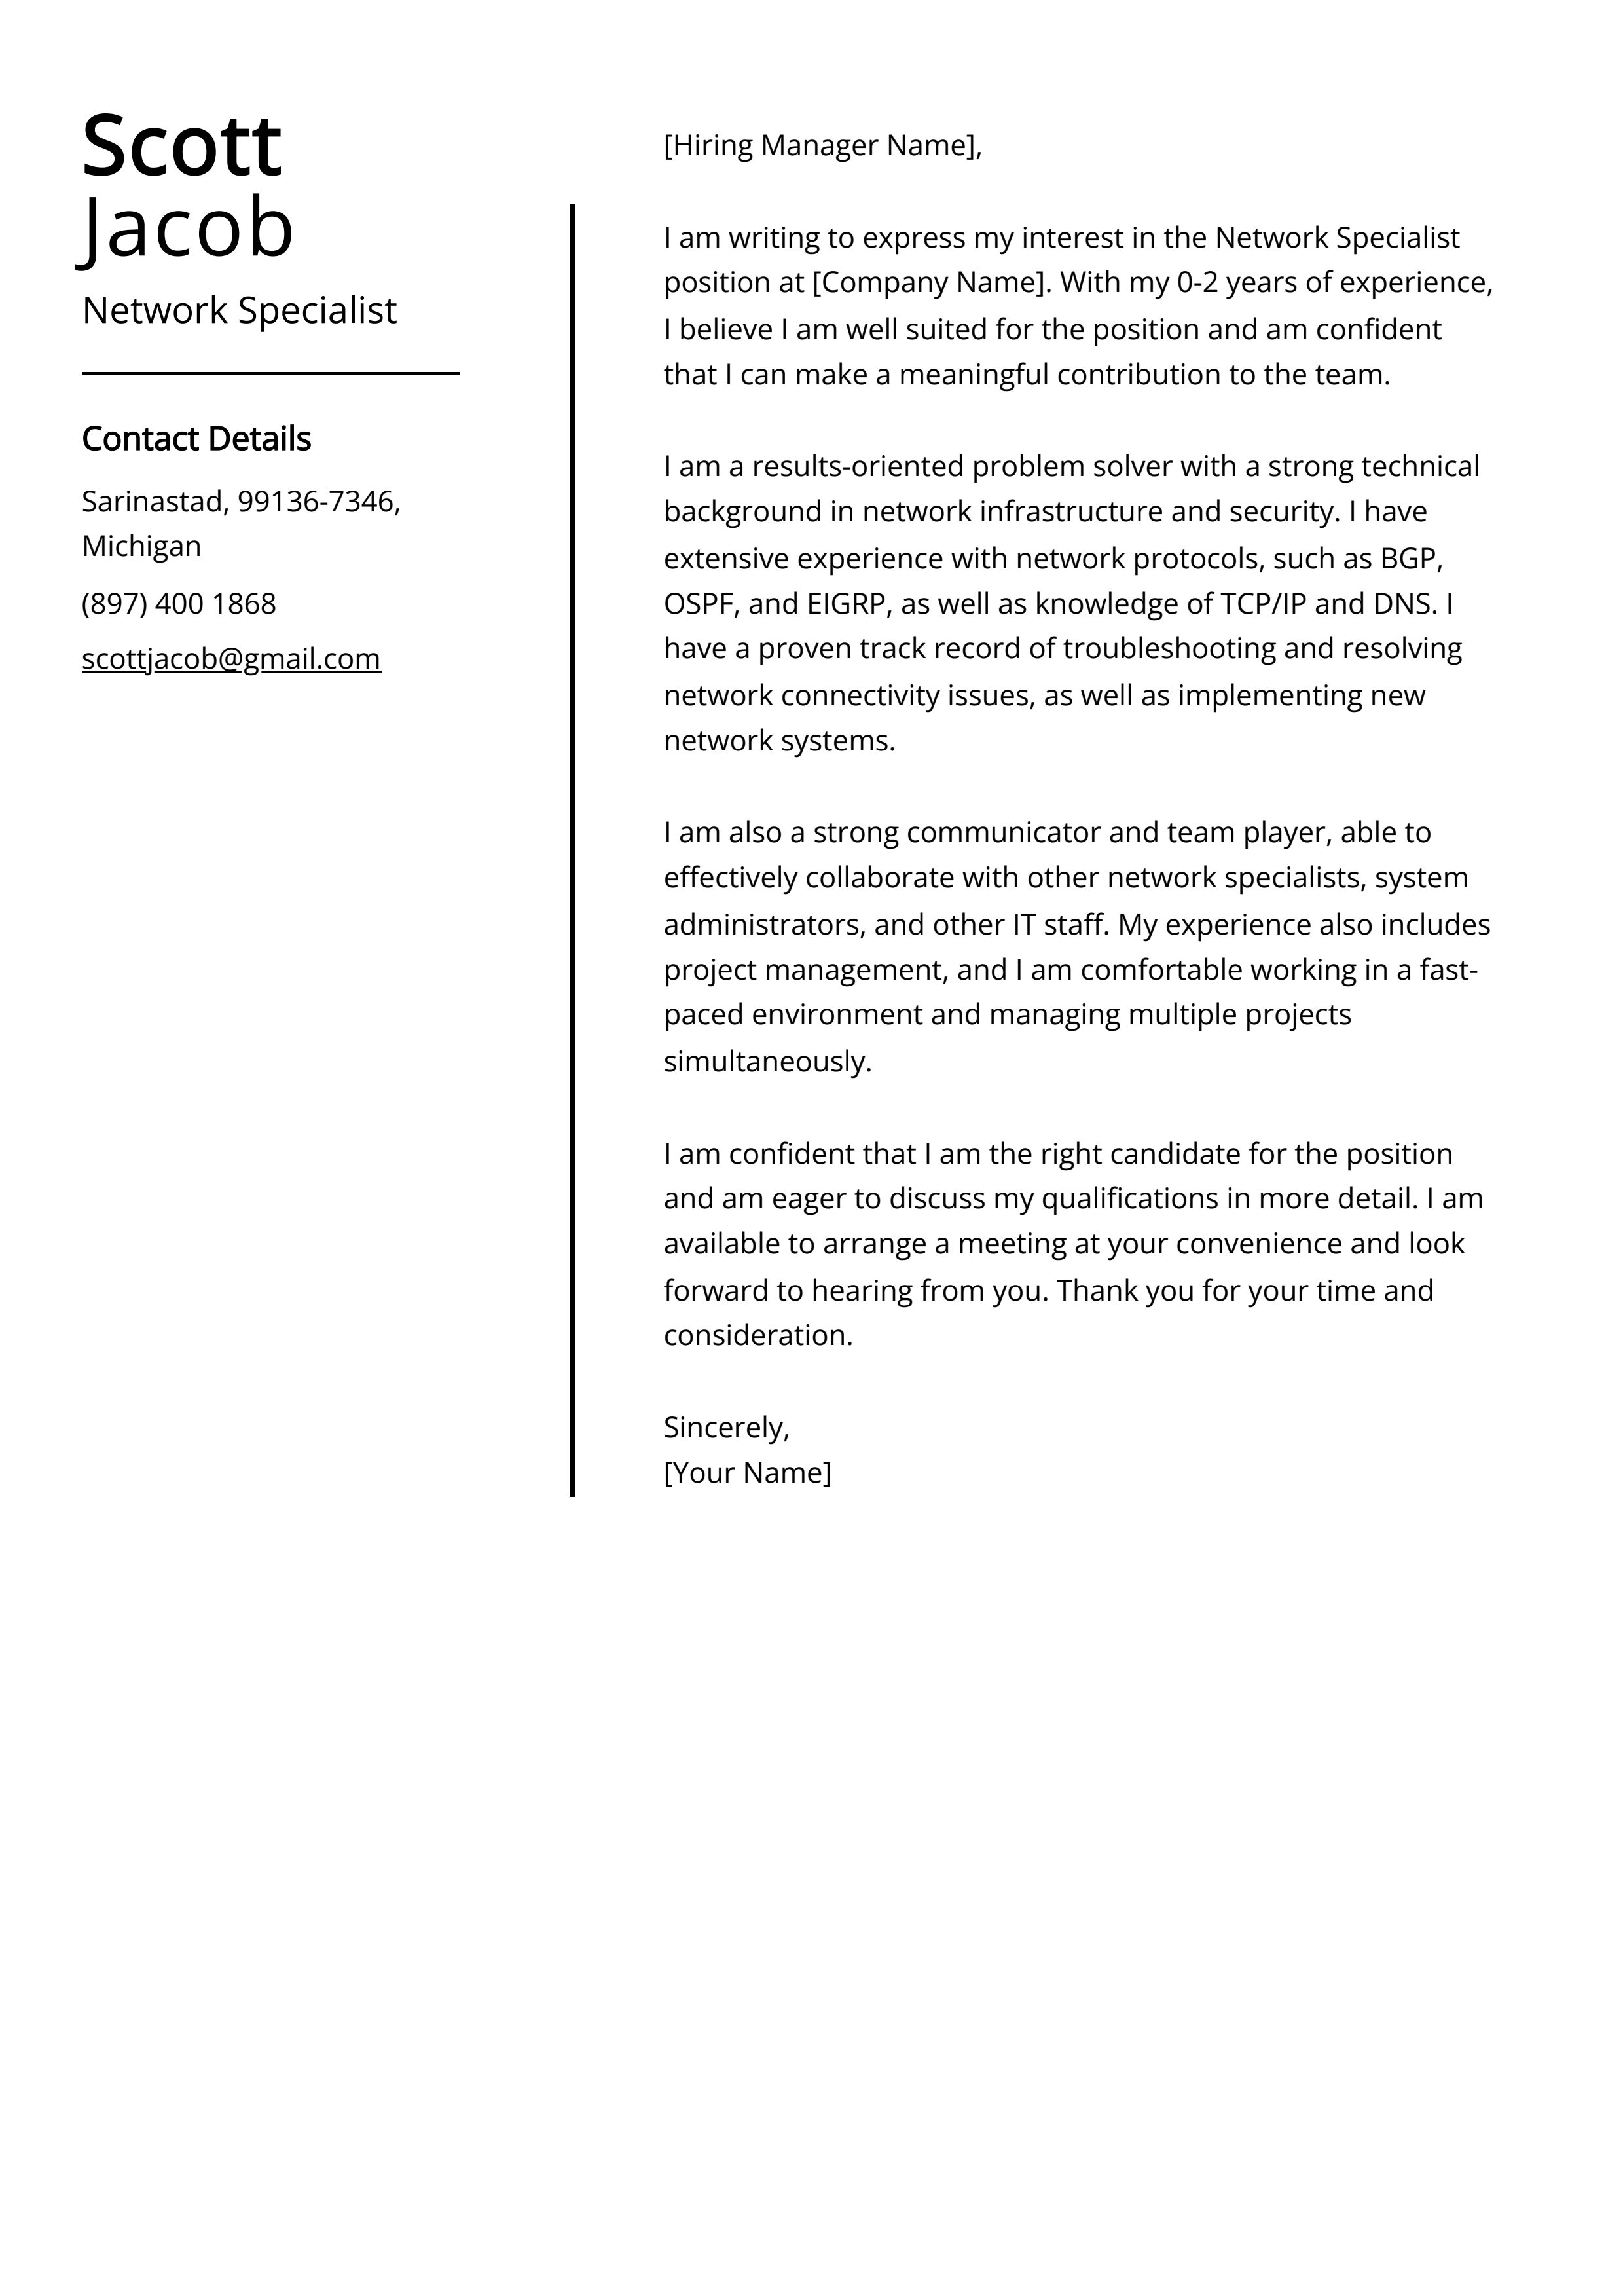 Network Specialist Cover Letter Example